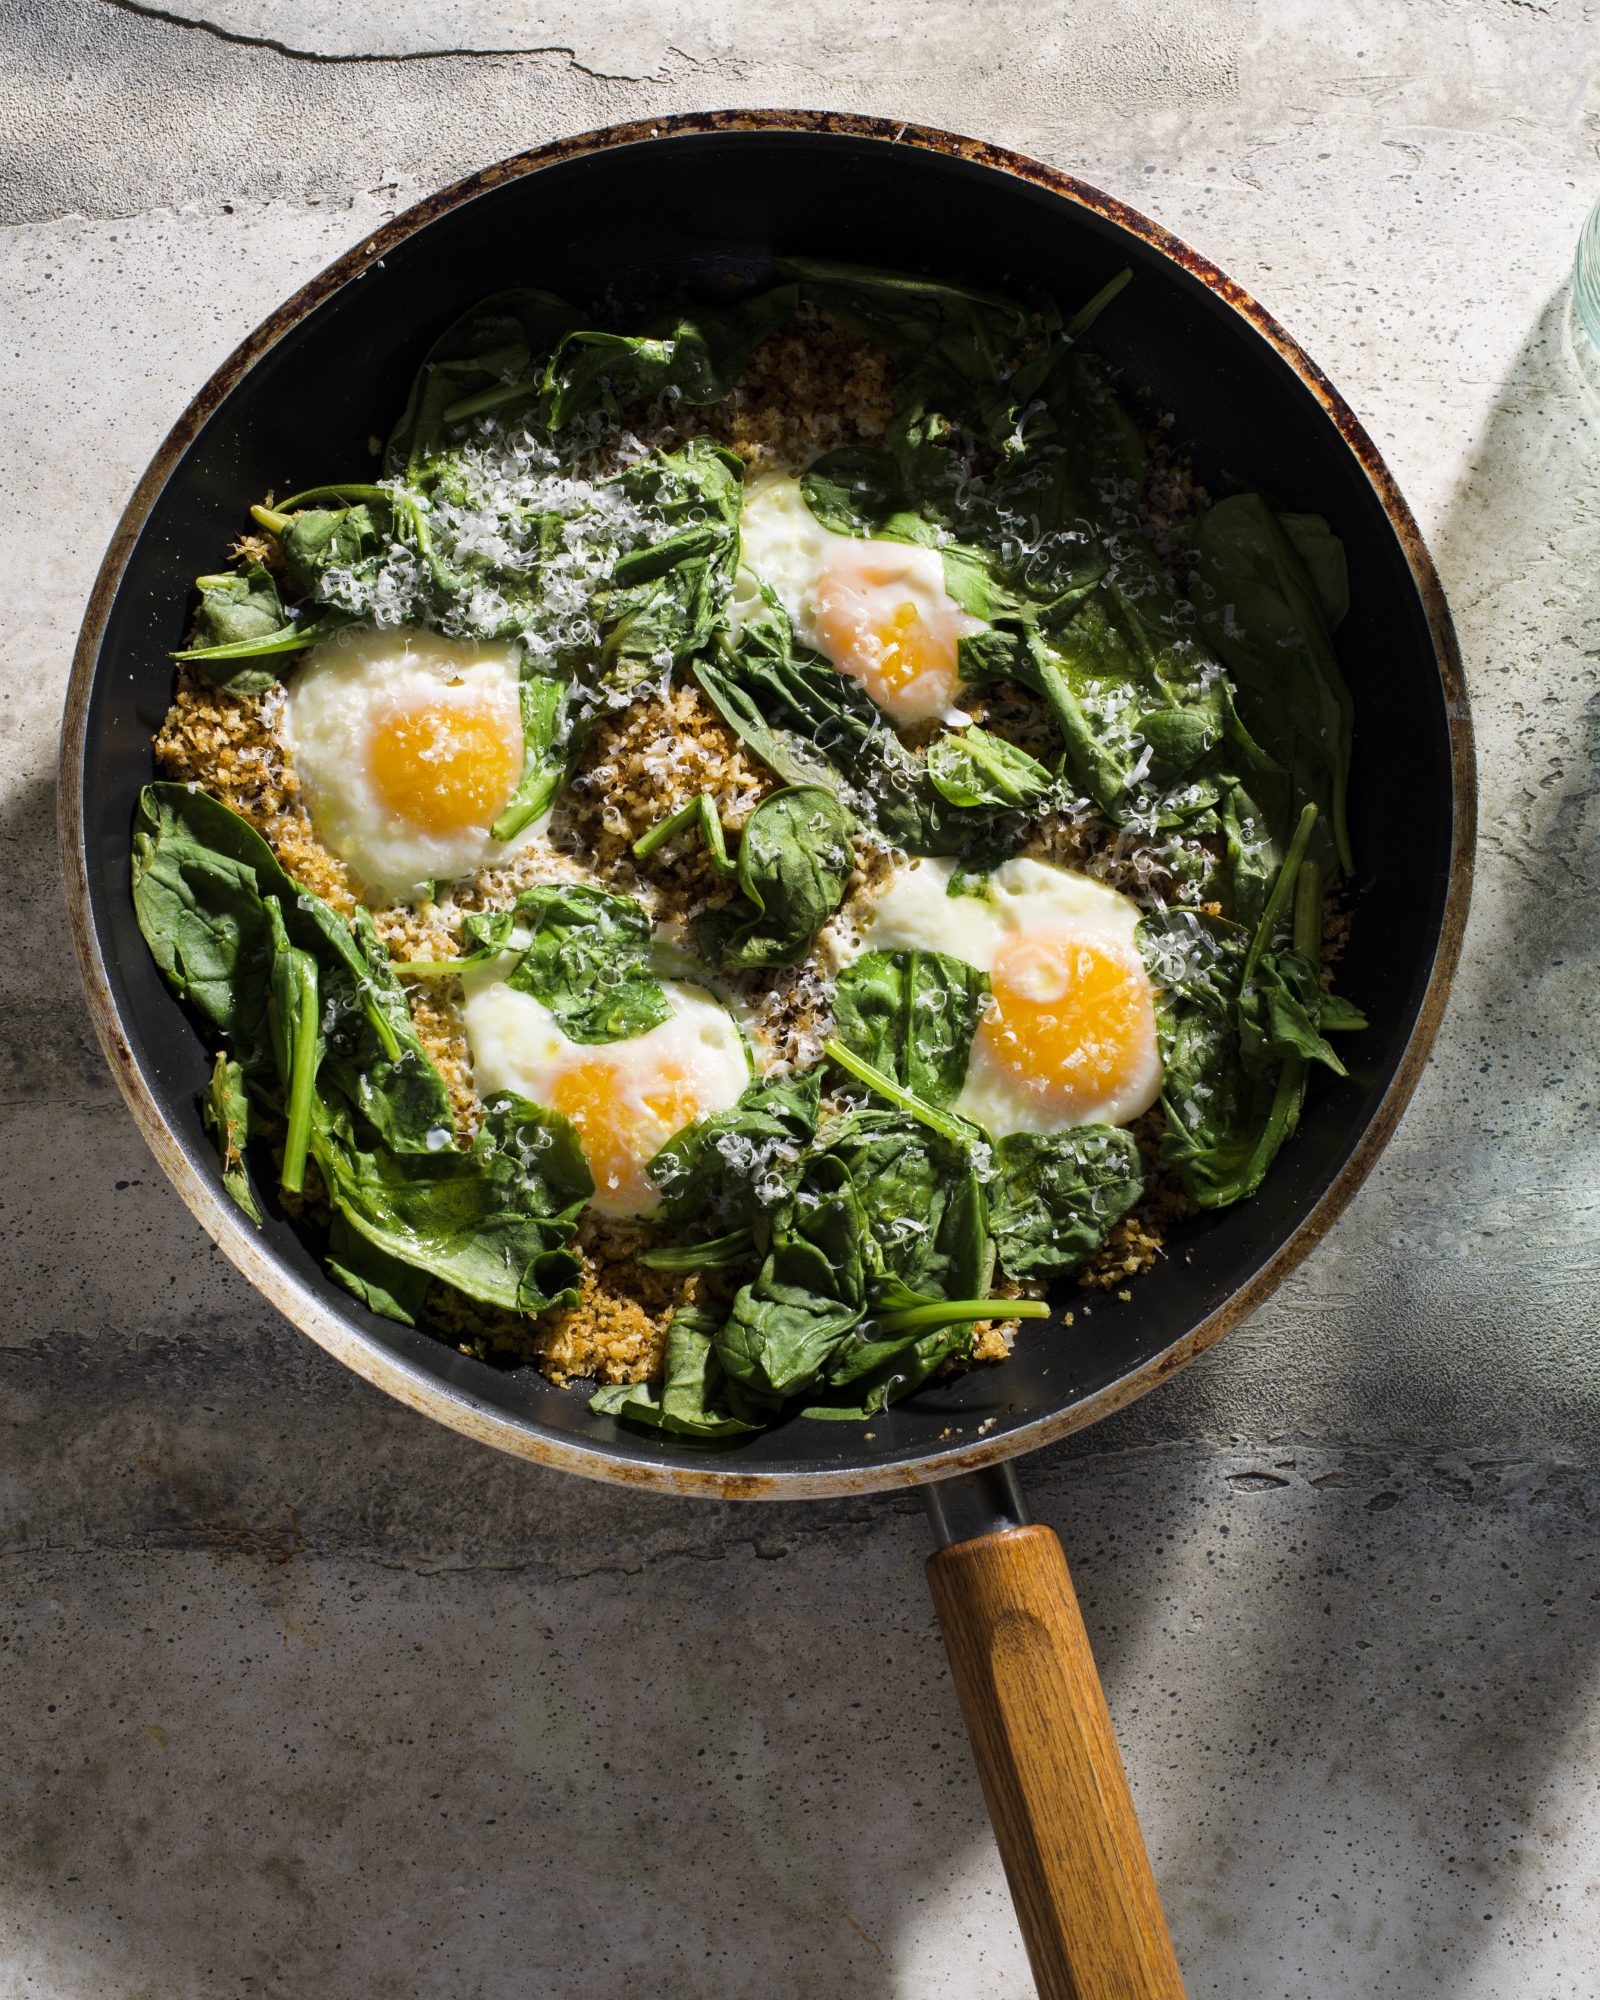 Eggs fried in parmesan breadcrumbs wilted spinach v1